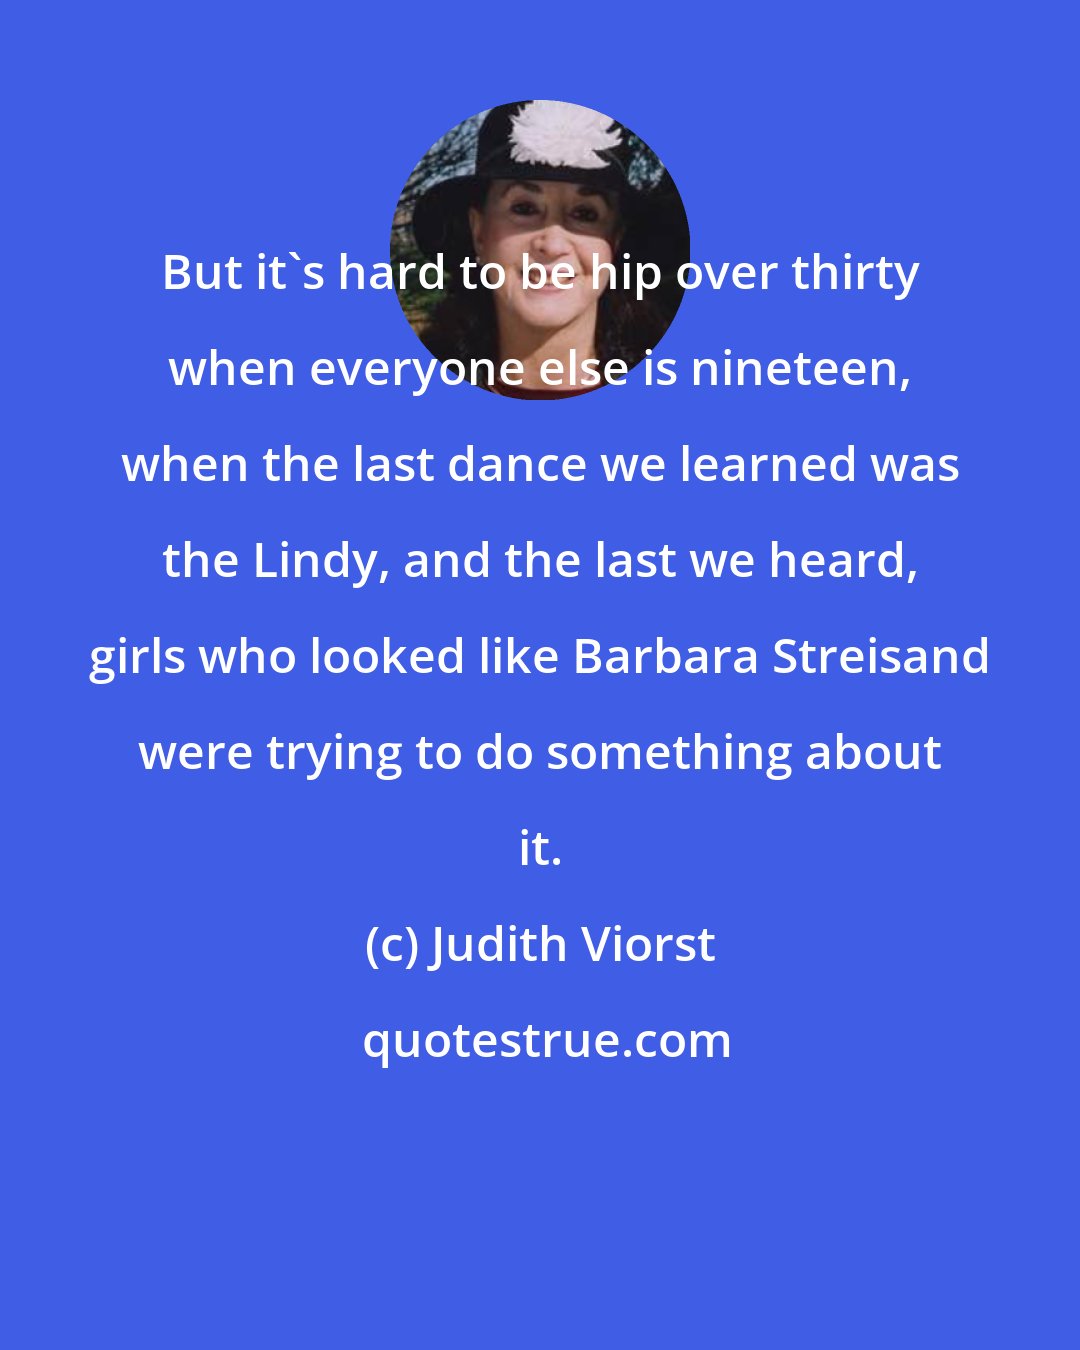 Judith Viorst: But it's hard to be hip over thirty when everyone else is nineteen, when the last dance we learned was the Lindy, and the last we heard, girls who looked like Barbara Streisand were trying to do something about it.